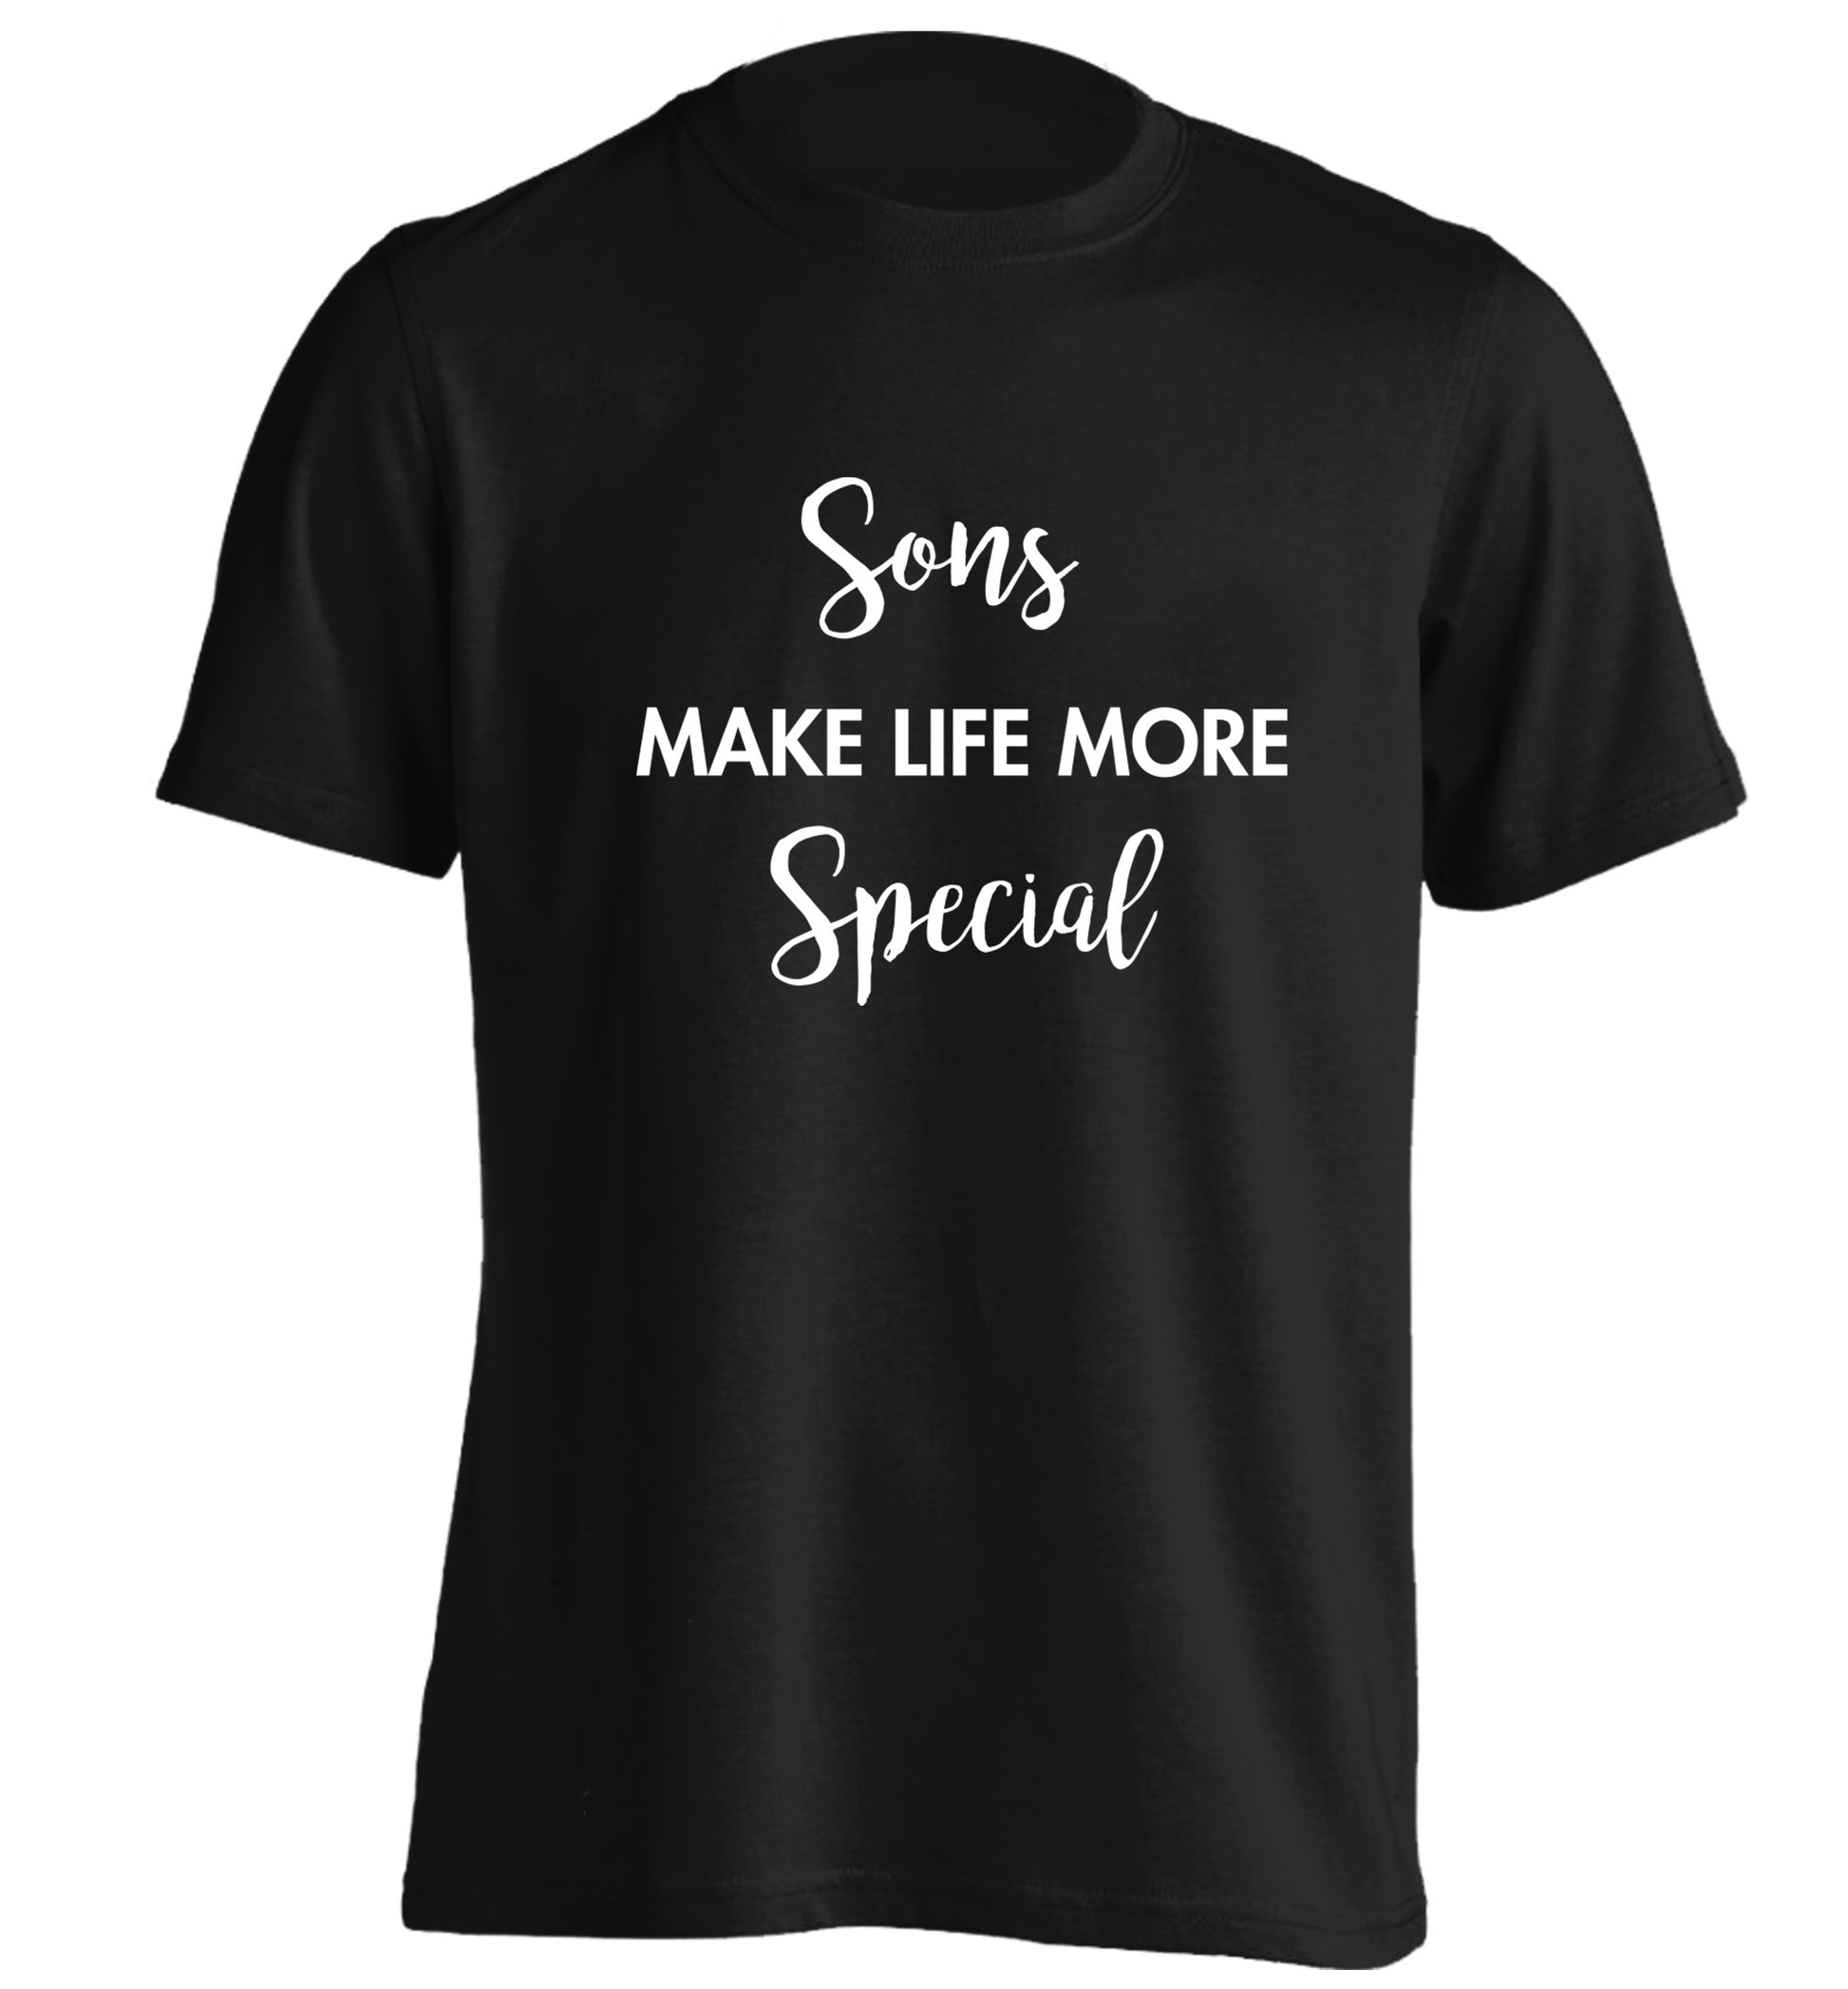 Daughters make life more special adults unisex black Tshirt 2XL